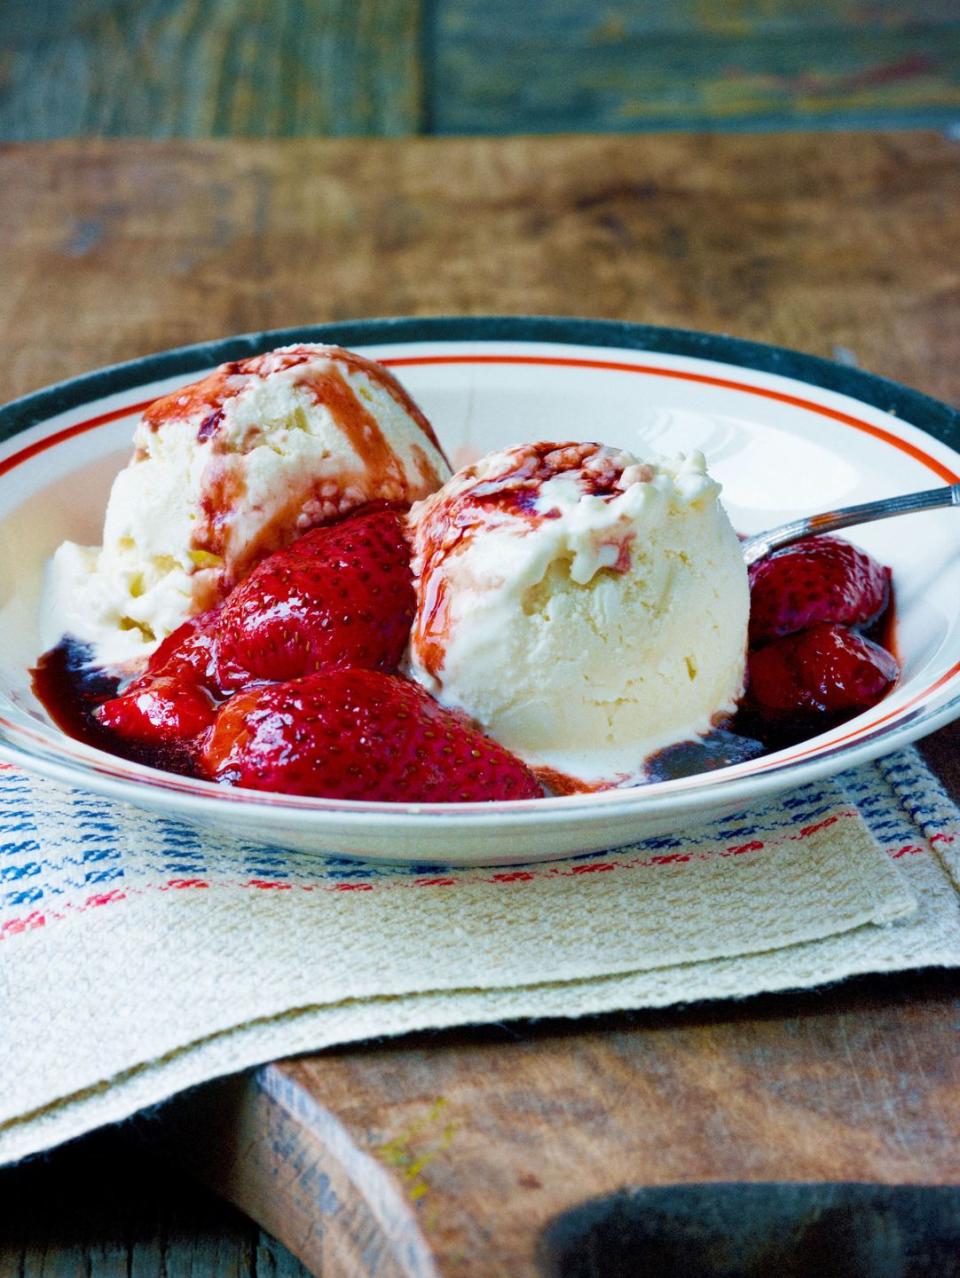 Balsamic-Roasted Strawberries with Chèvre Ice Cream